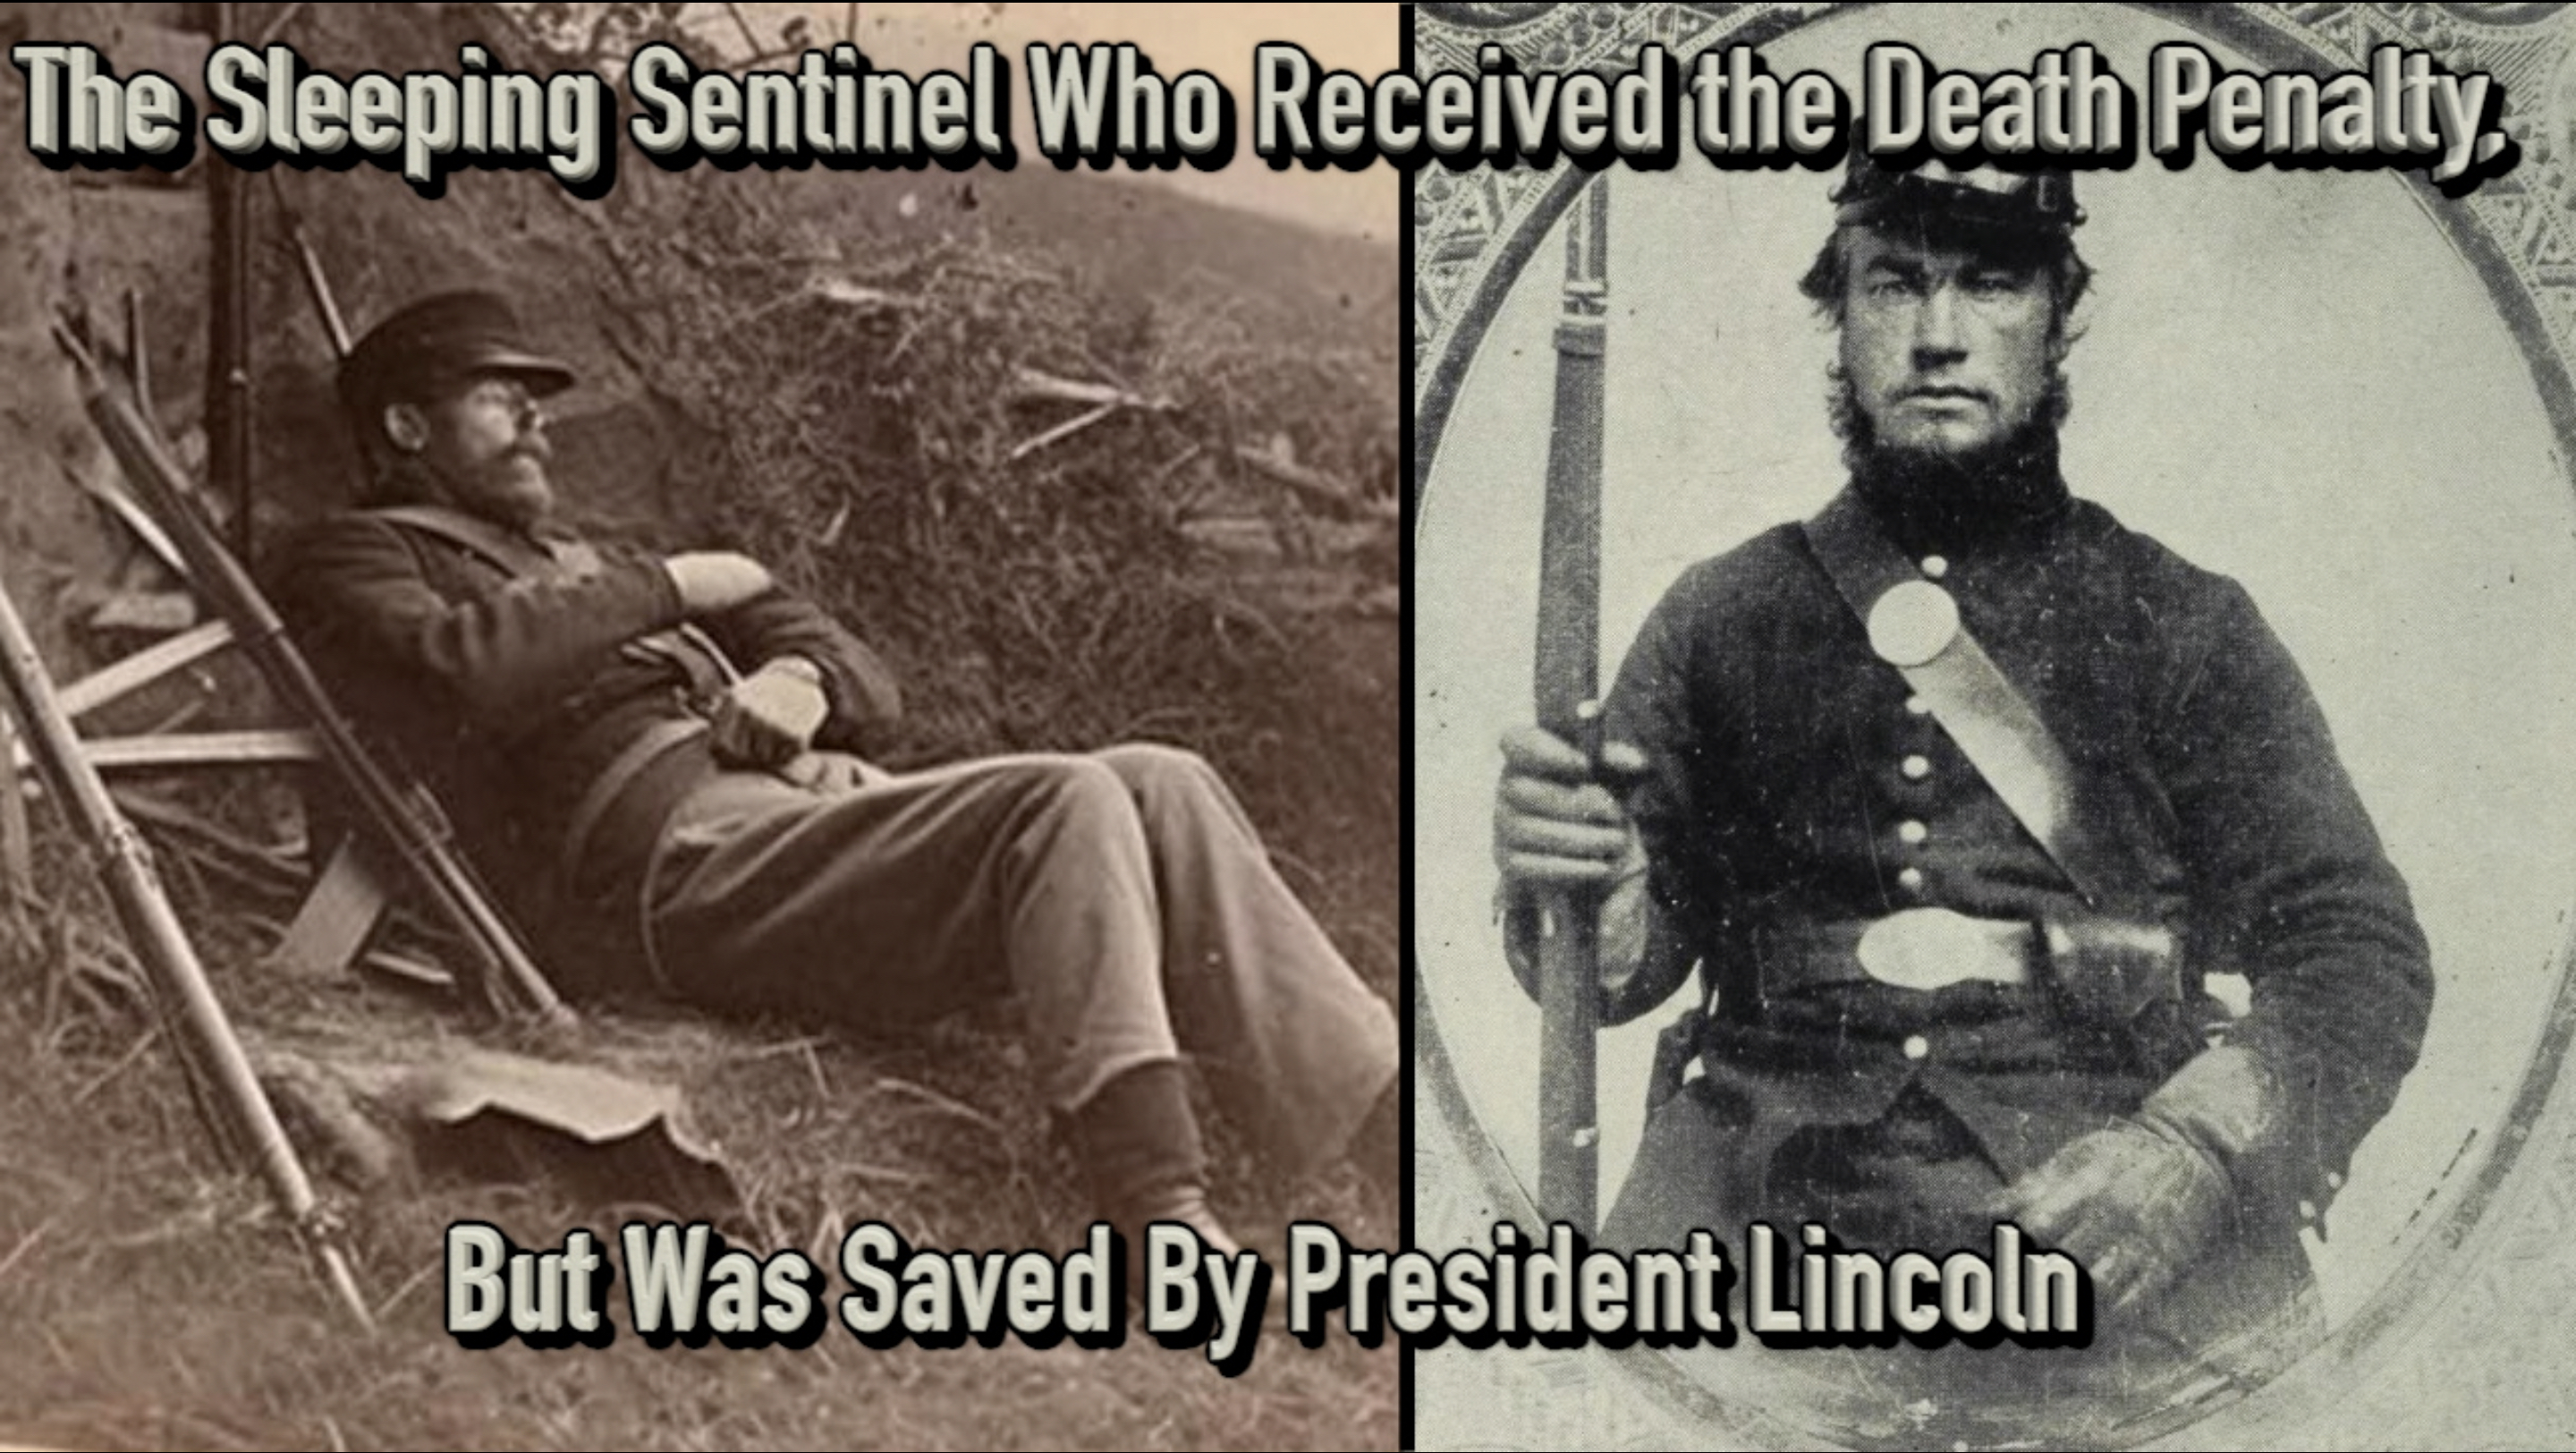 The Sleeping Sentinel Who Received the Death Penalty, But Was Saved By President Lincoln